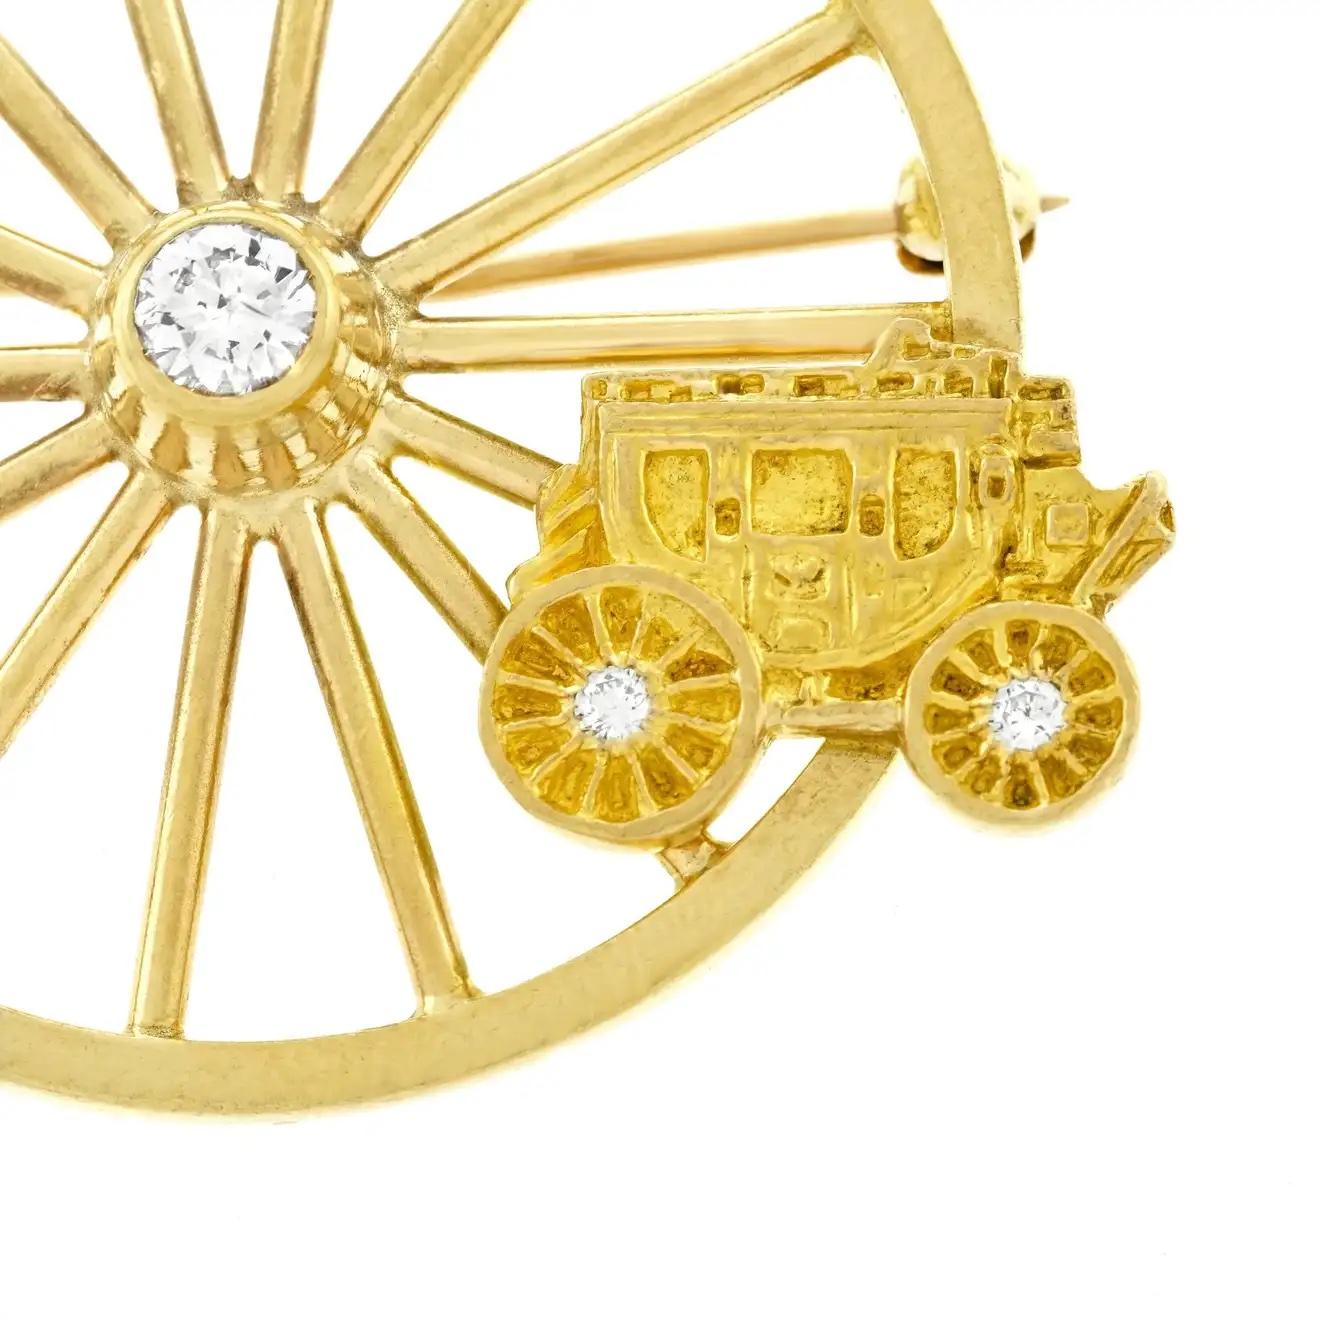 This charismatic Tiffany & Co. brooch features a charming western motif crafted in 14k yellow gold. The design shows one big spoked wheel that is set with a 0.25 ct. natural diamond showing G color and VS clarity. The look is unmistakably Western